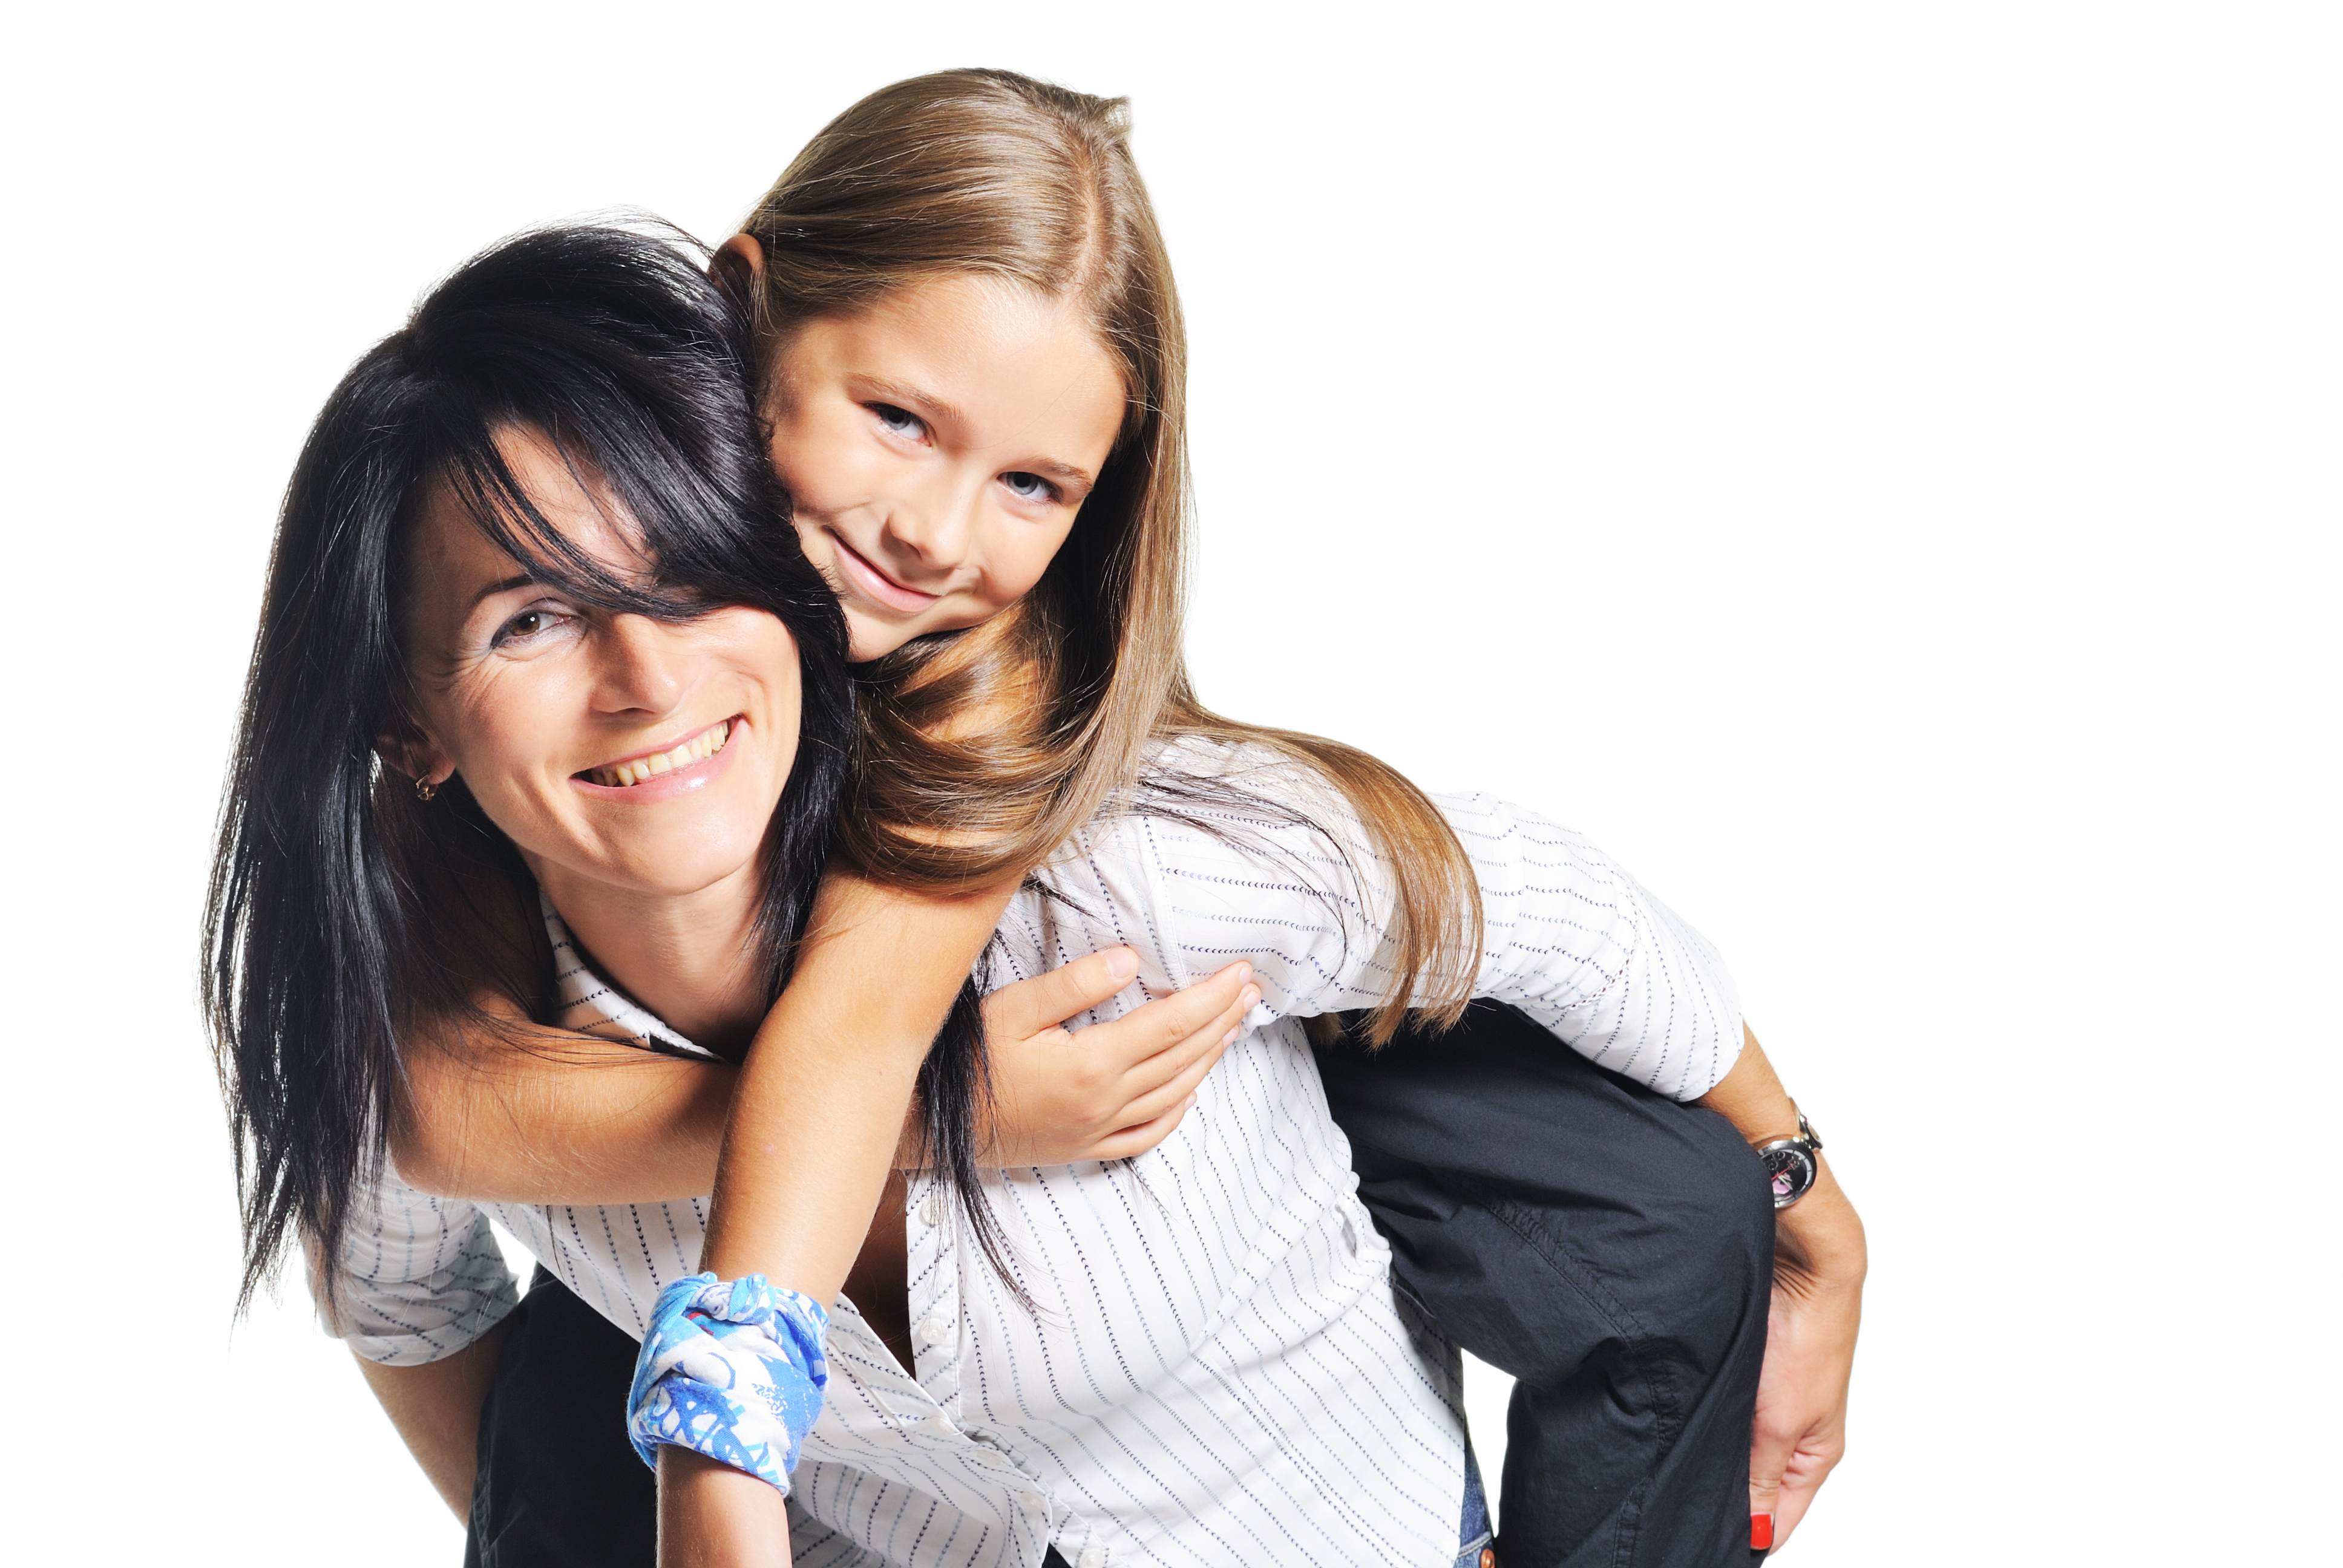 A woman carrying a young girl on her back | Source: Shutterstock